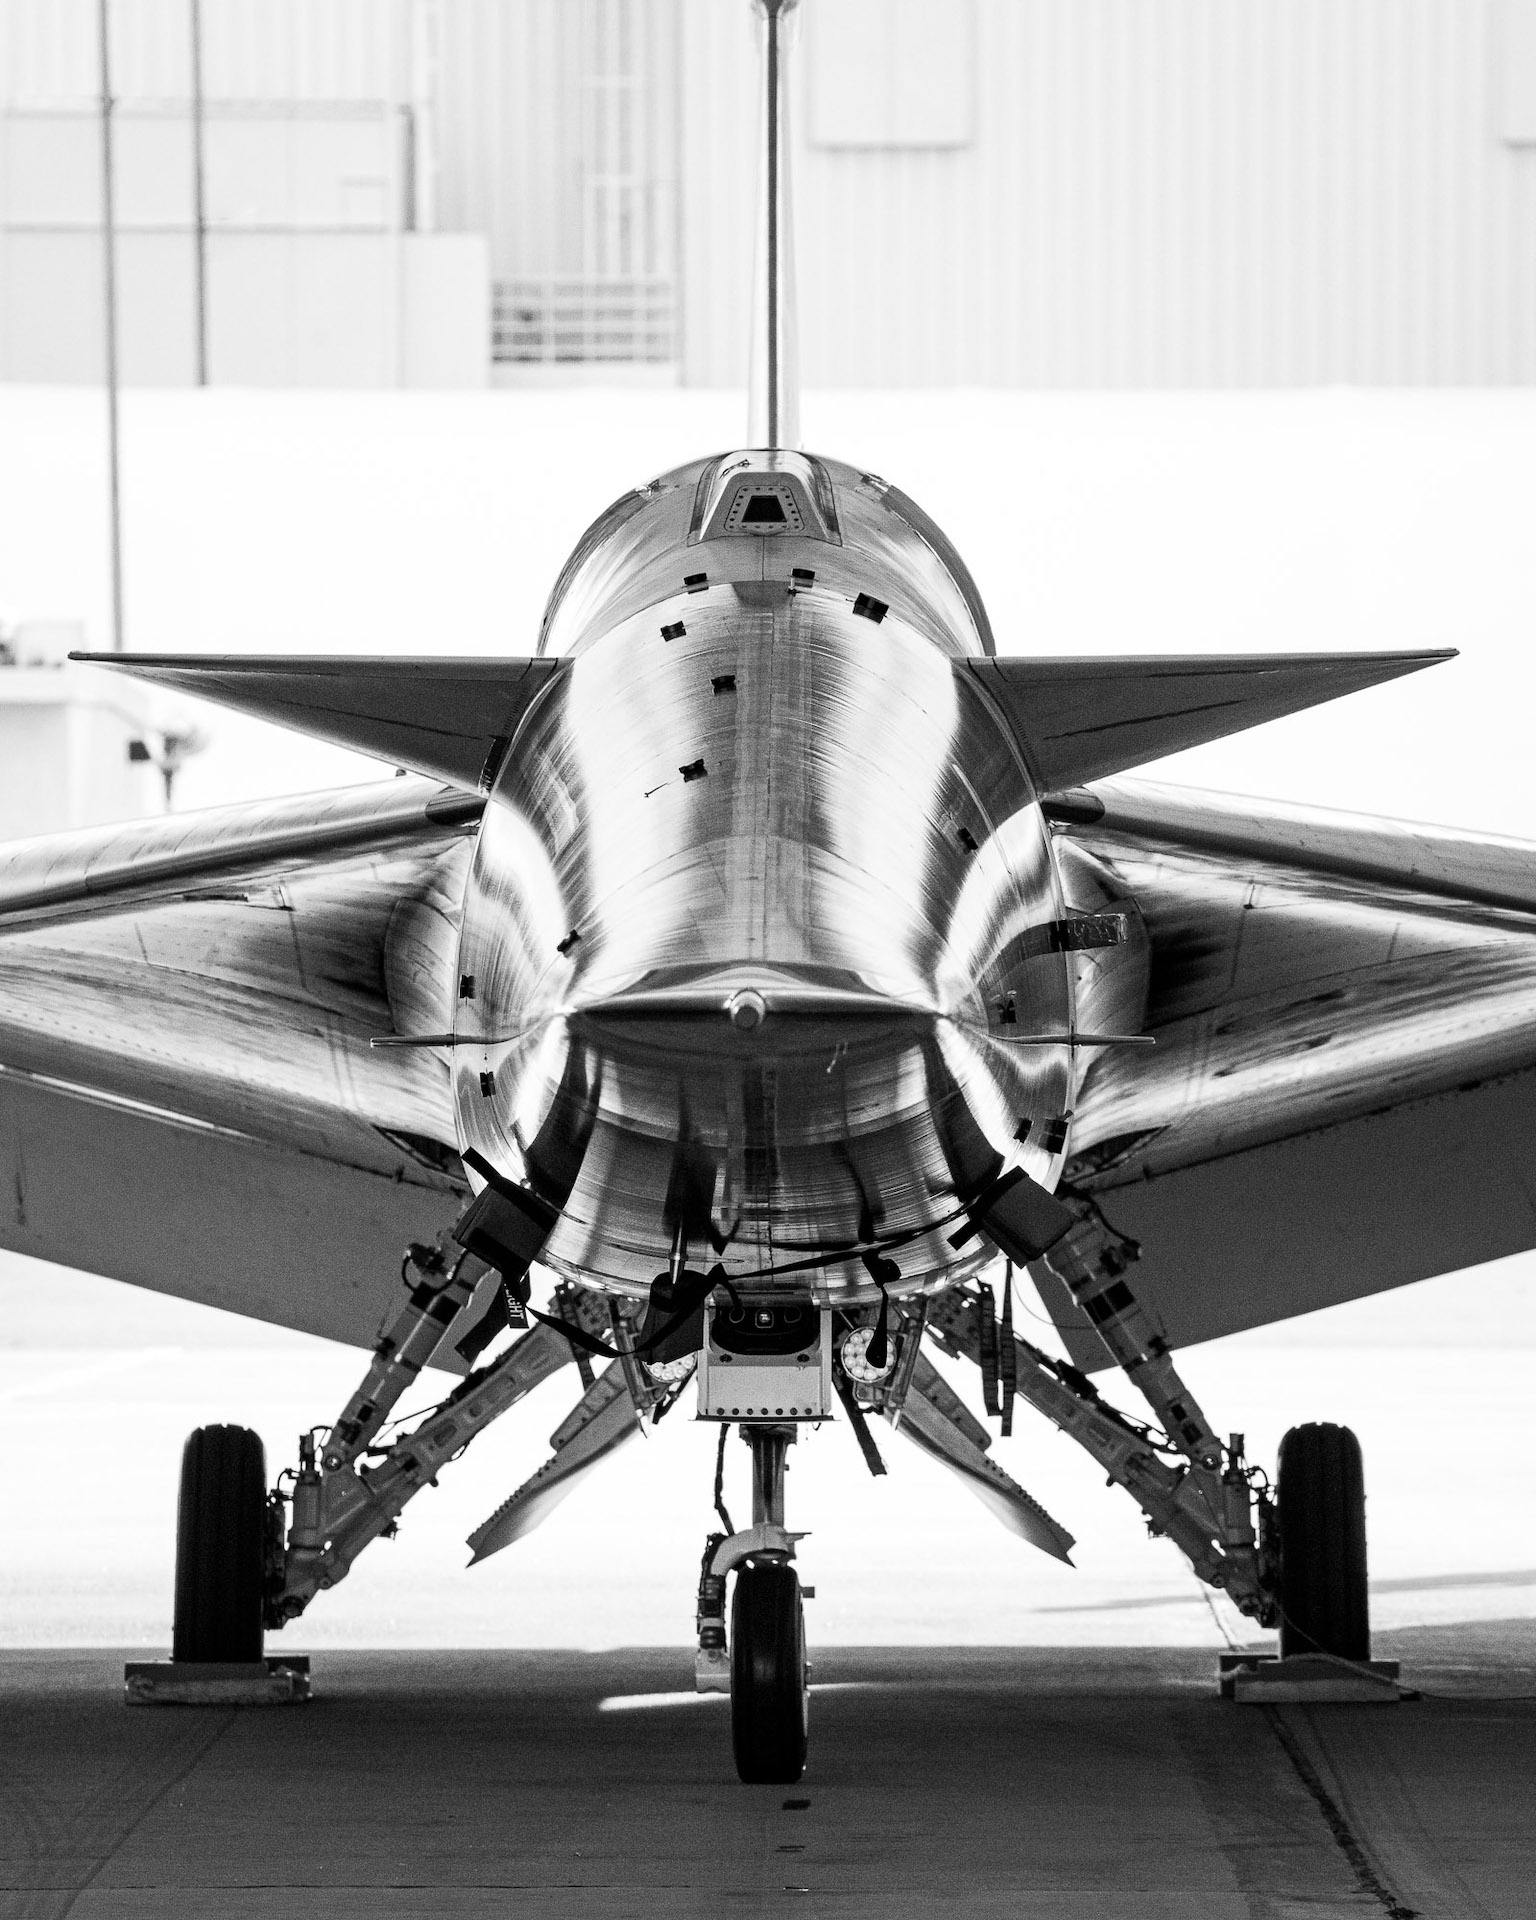 A head-on black and white image of the X-59 supersonic jet. The jet sits on three-wheeled landing gear, and the sharp, sleek angles of the jet's body and wings reflect as shapely light, highlighting the craft's curves and details.